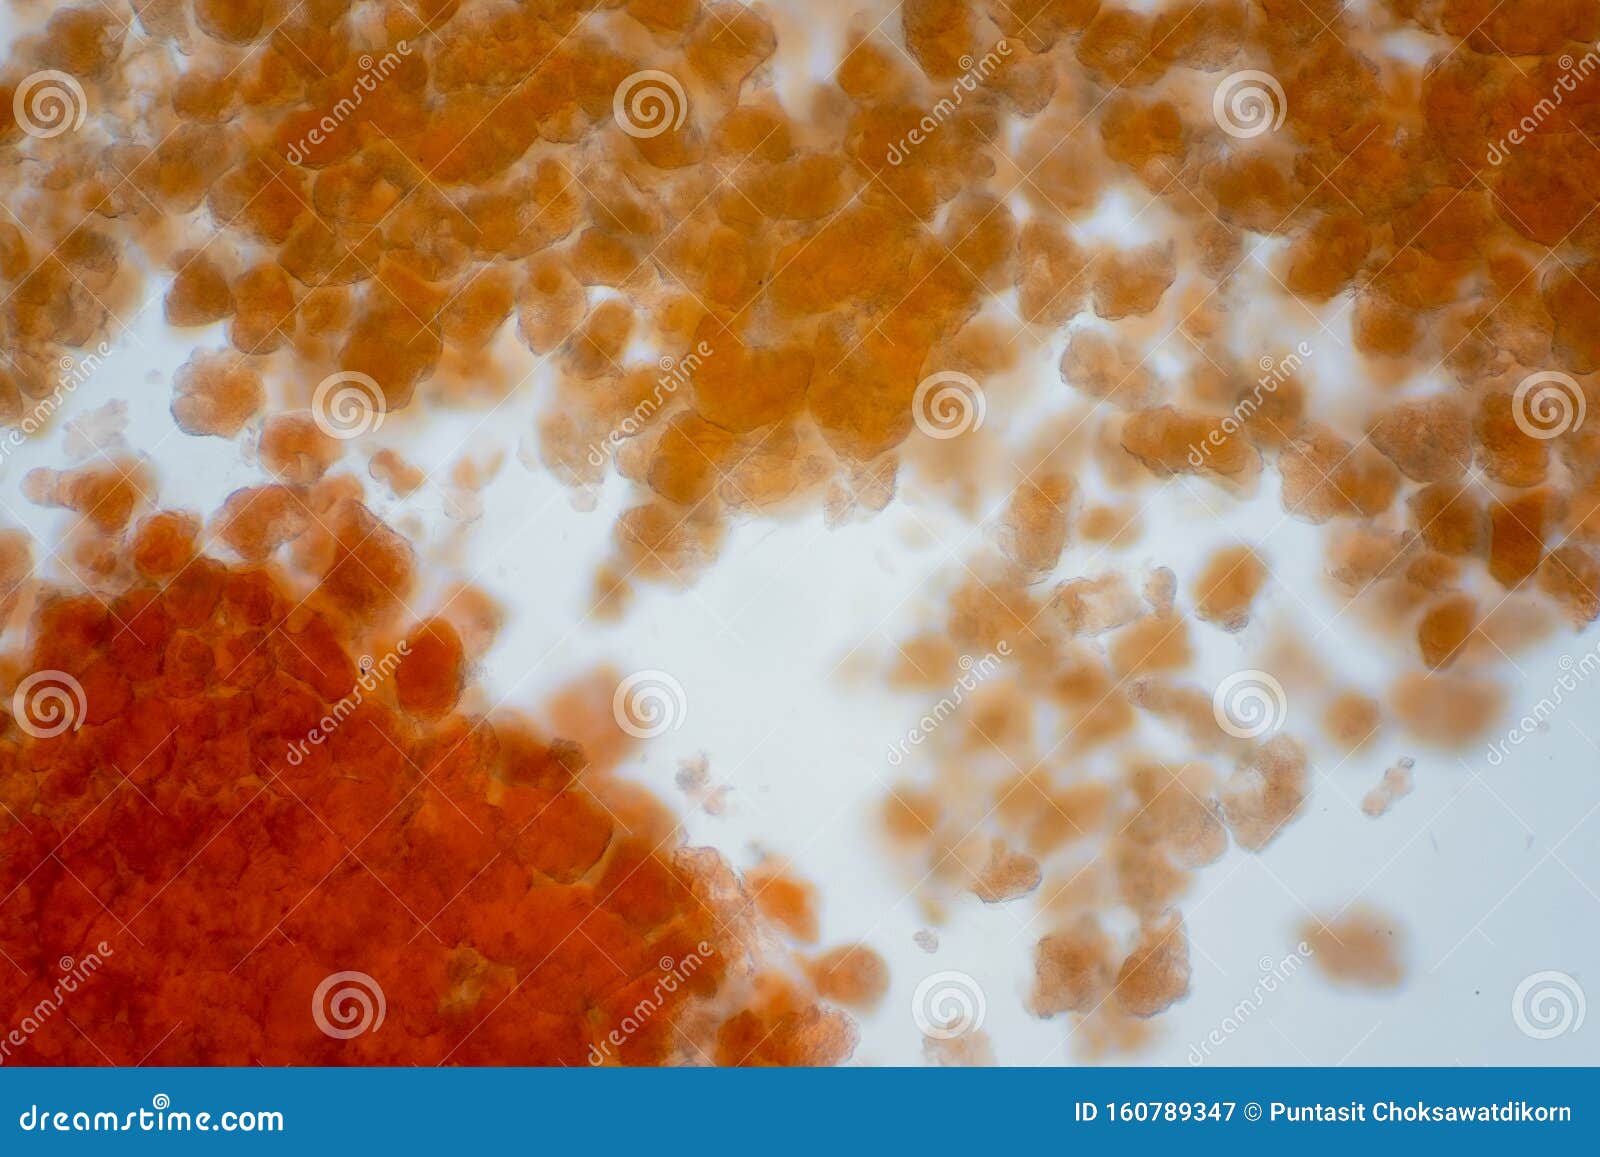 adipose tissue under microscope view show contains large lipid droplet